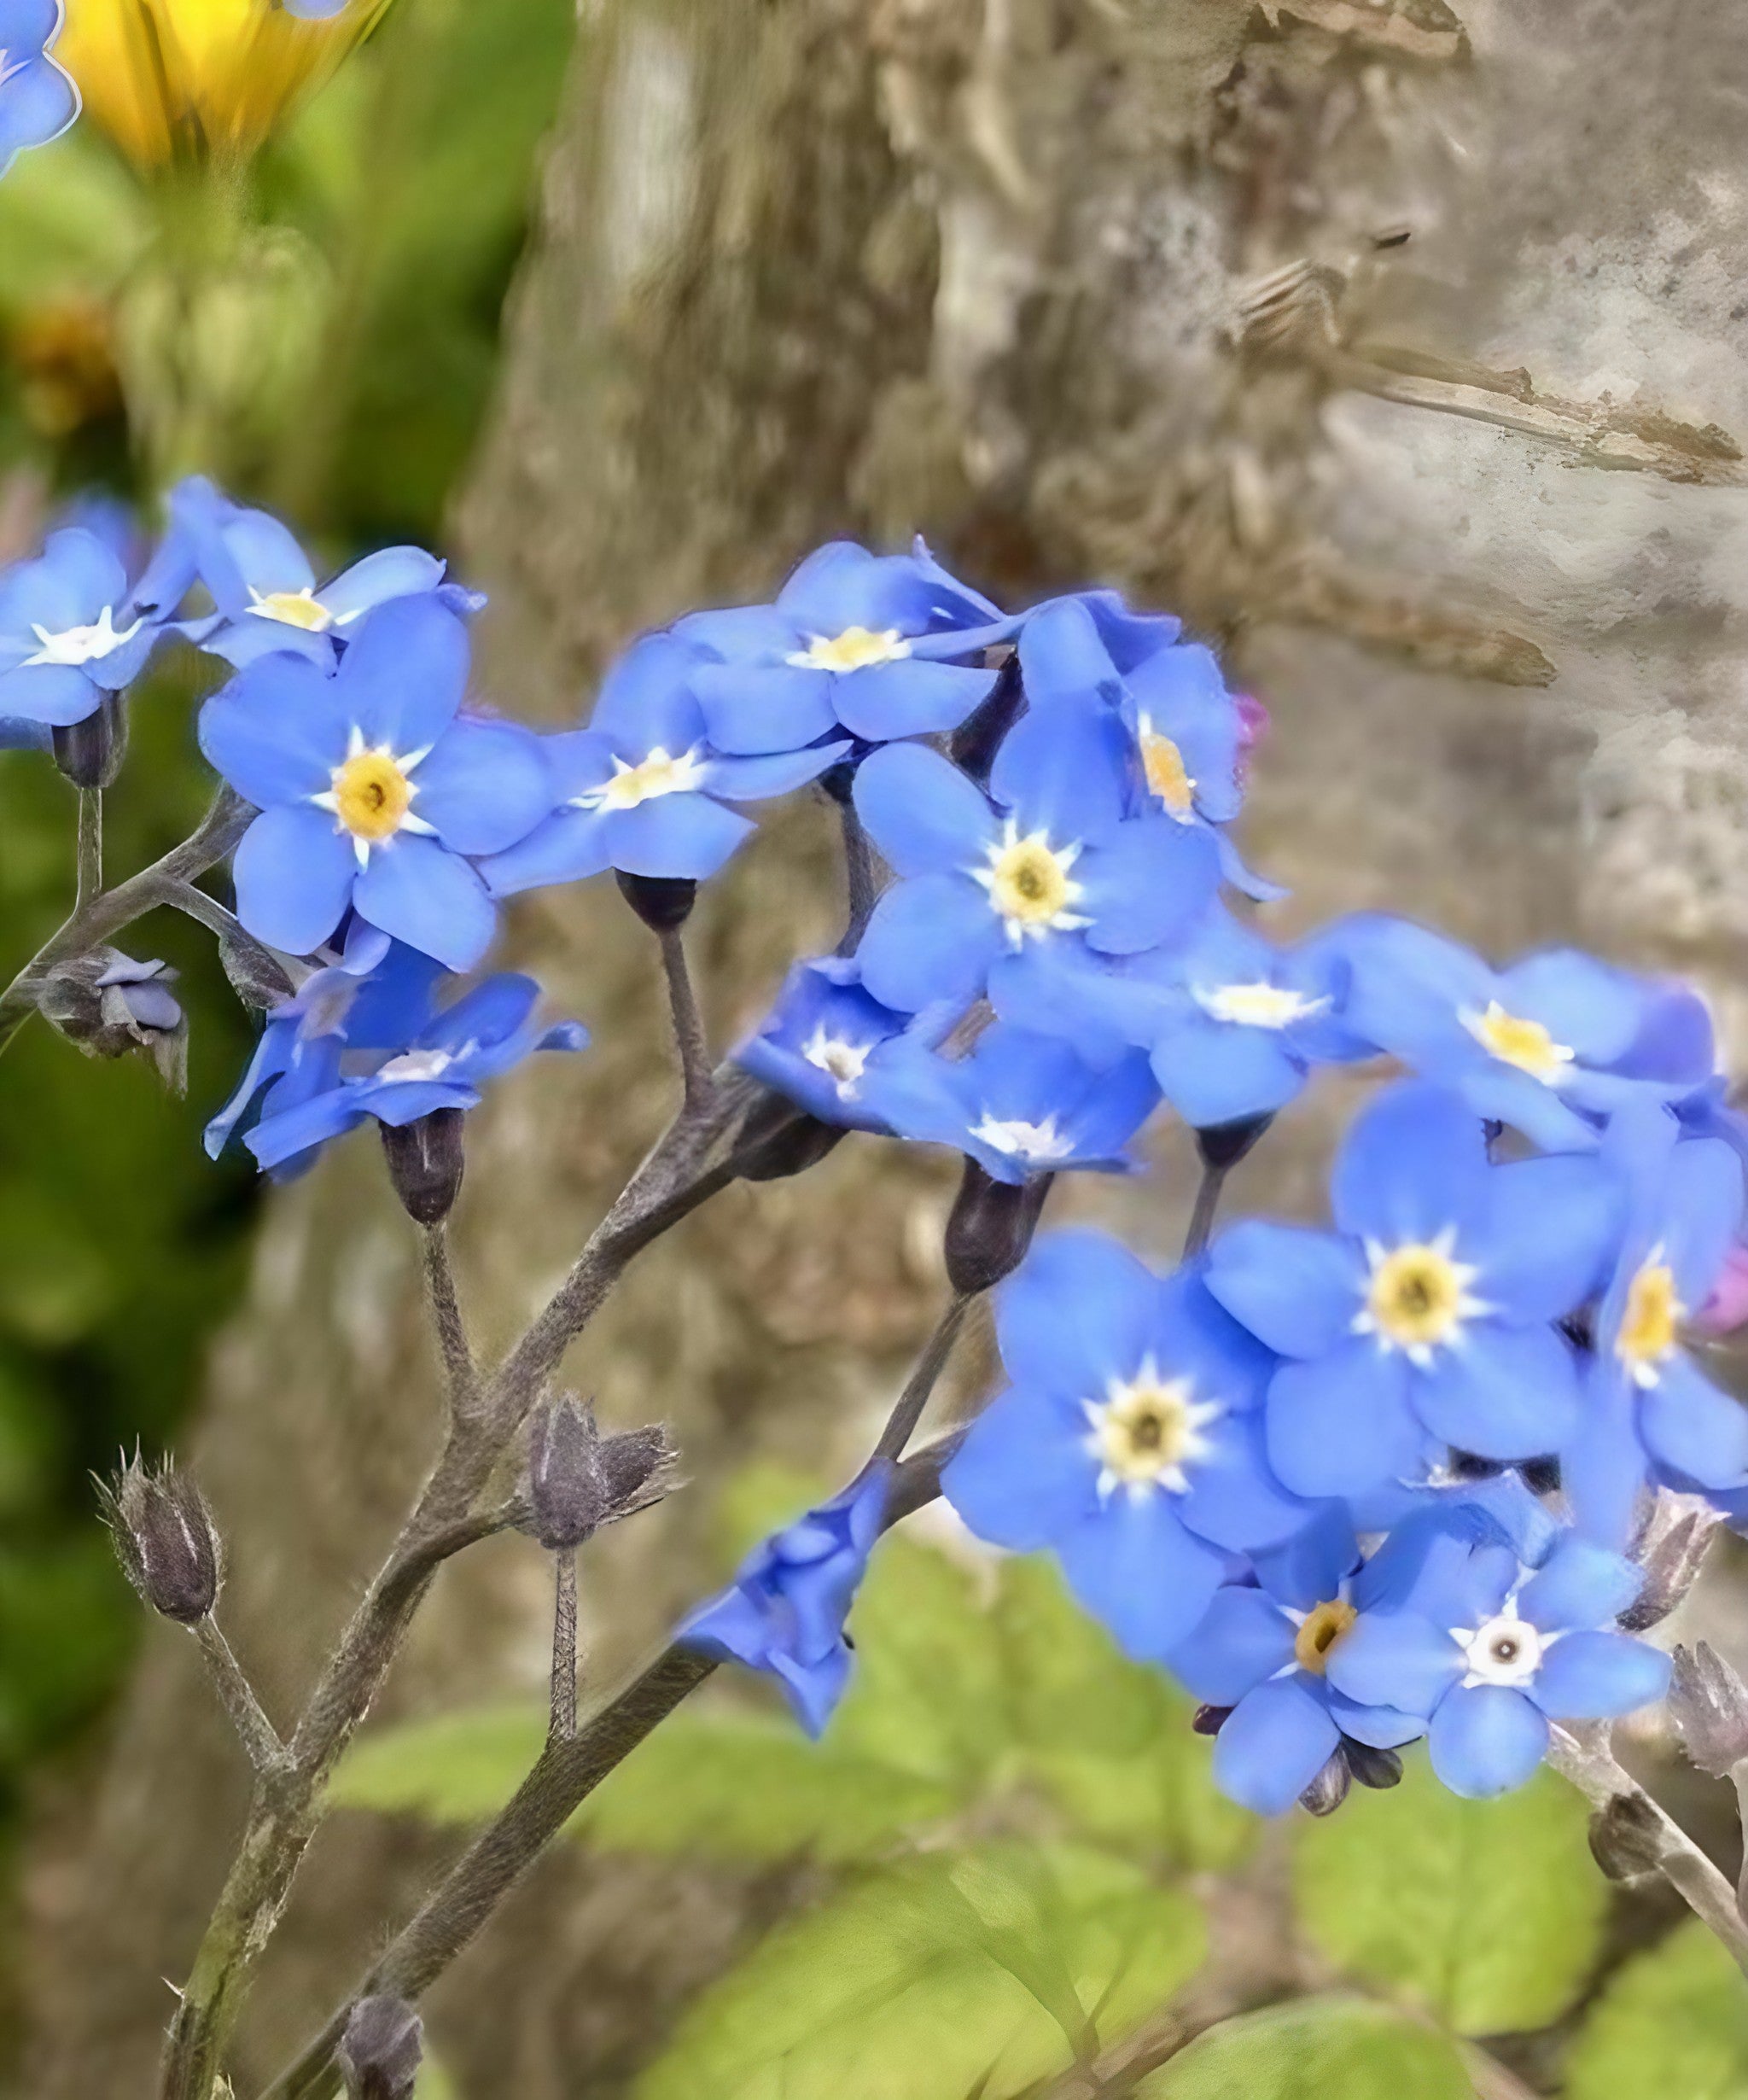 Forget-me-not flowers: how to plant and grow - Gardens Illustrated